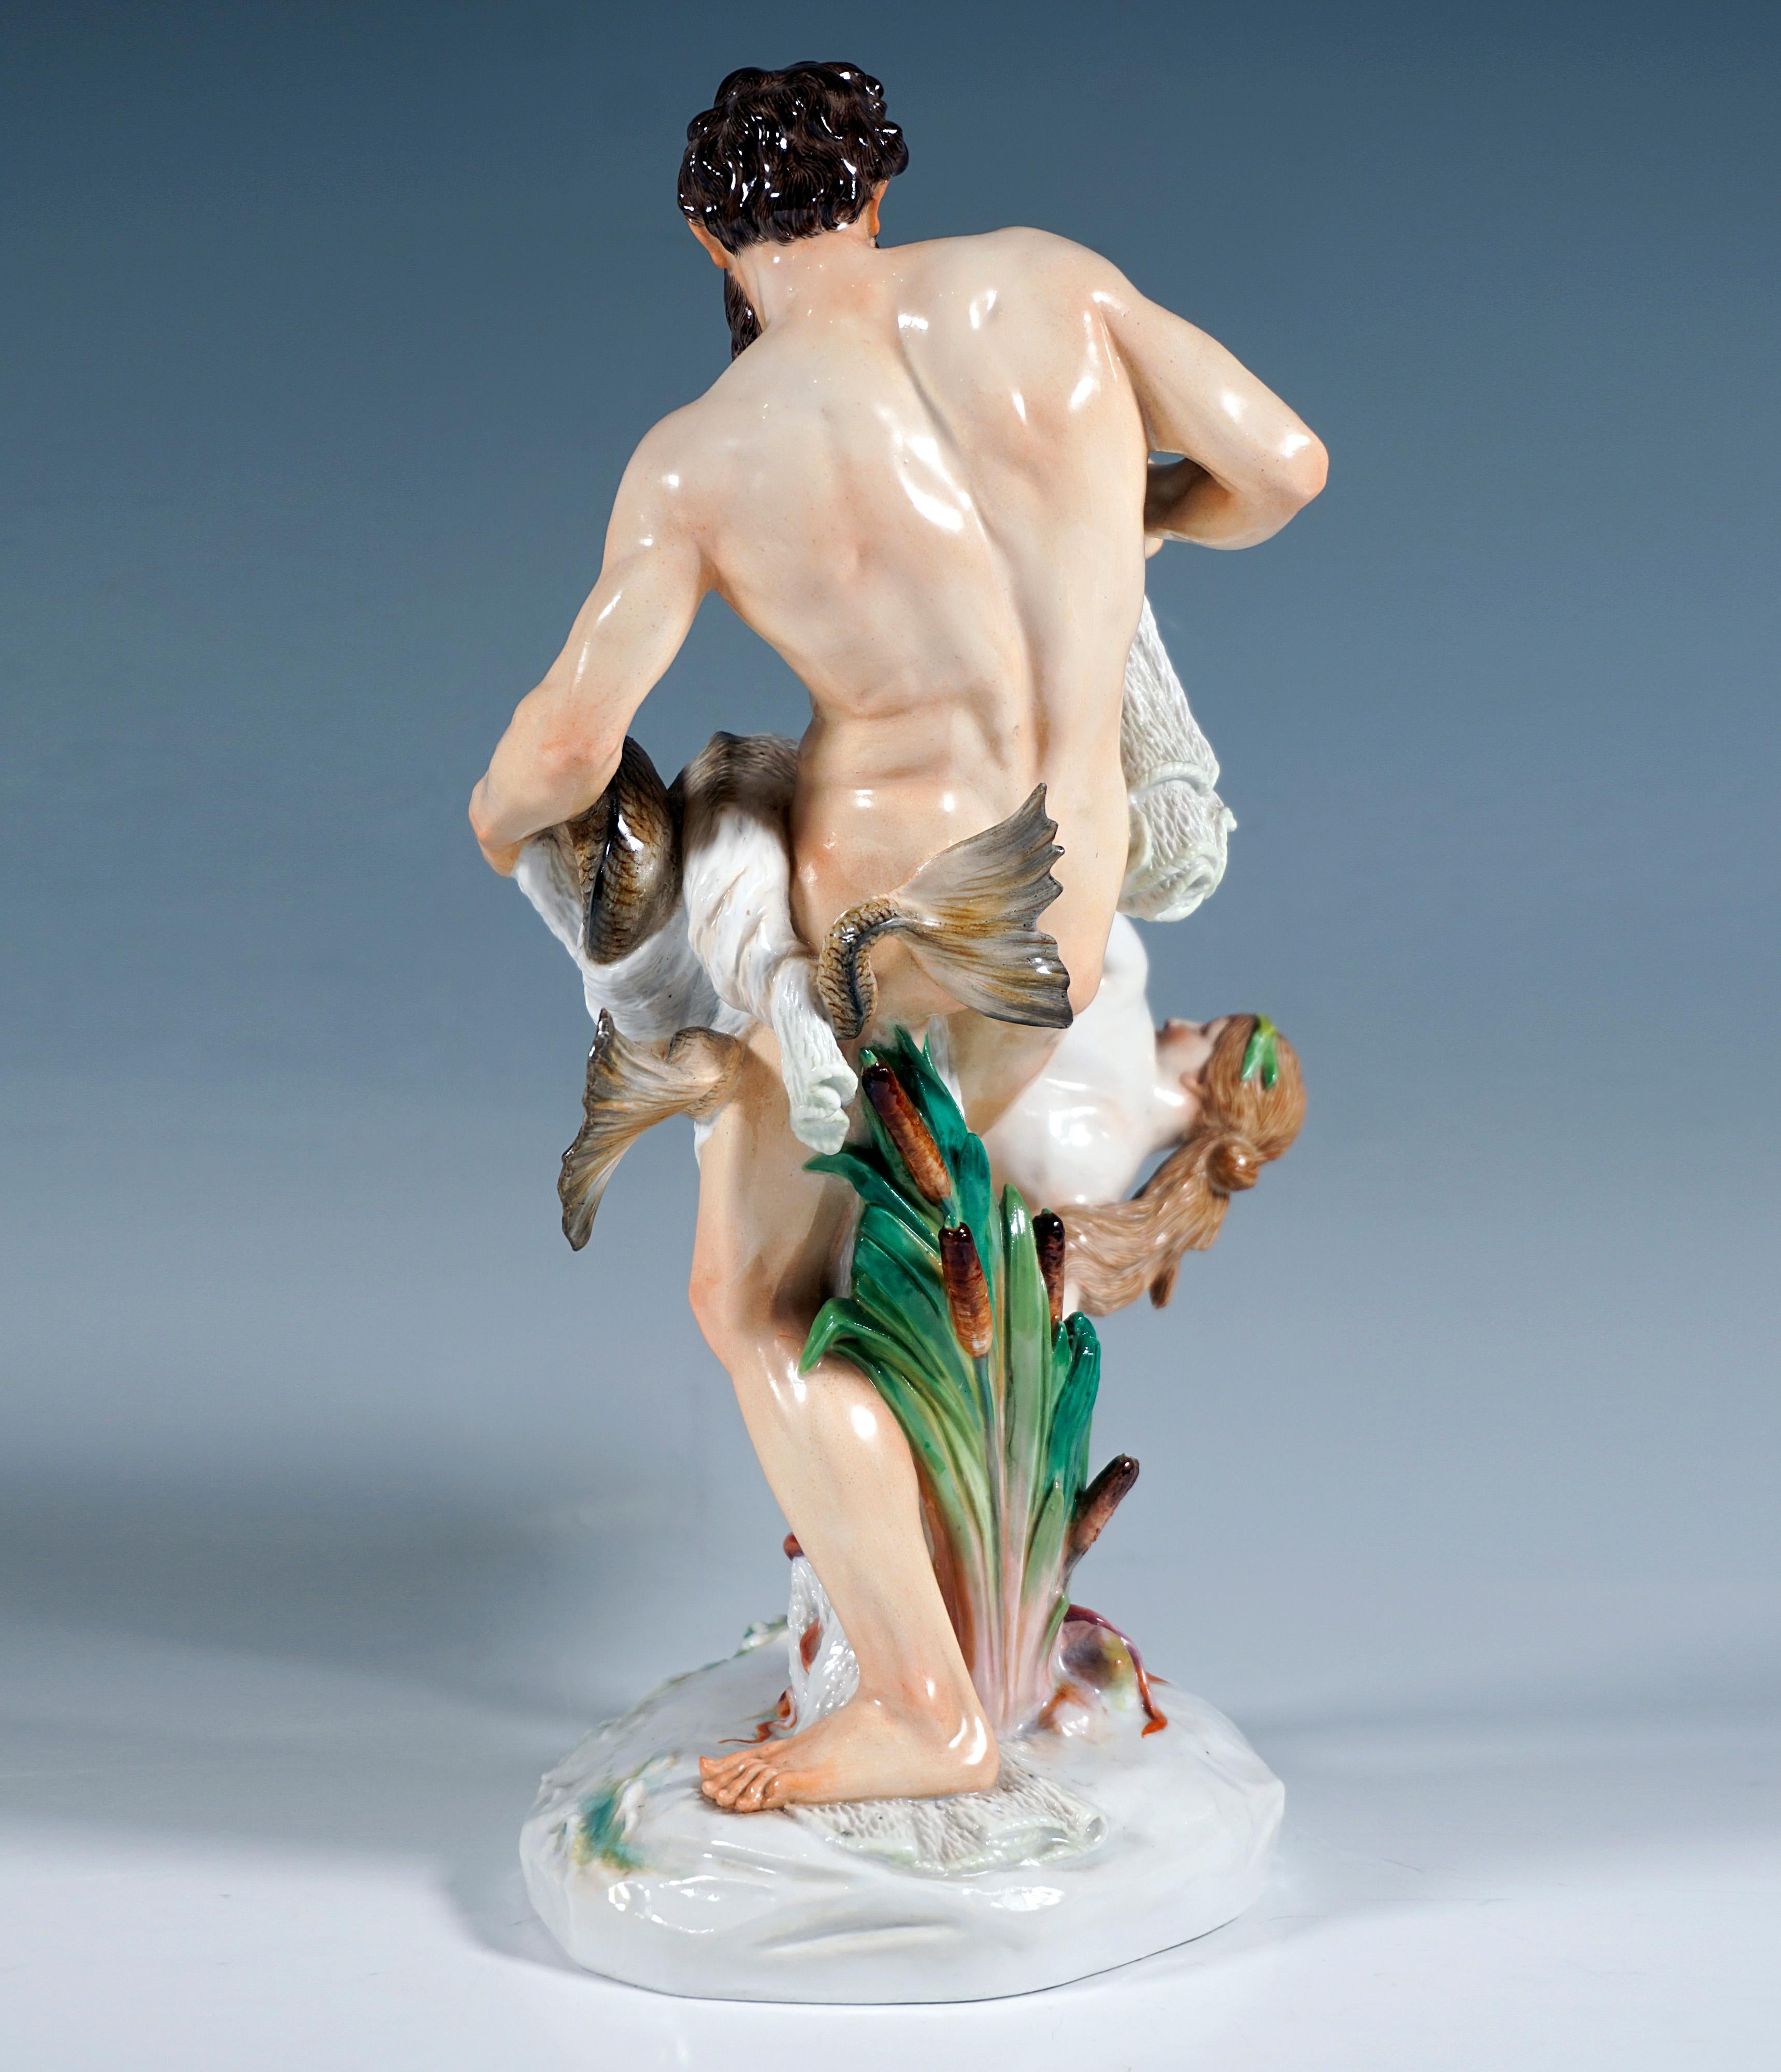 Hand-Crafted Art Nouveau Porcelain Group 'The Mermaid Catch', by E. Herter, Meissen Ca 1900 For Sale